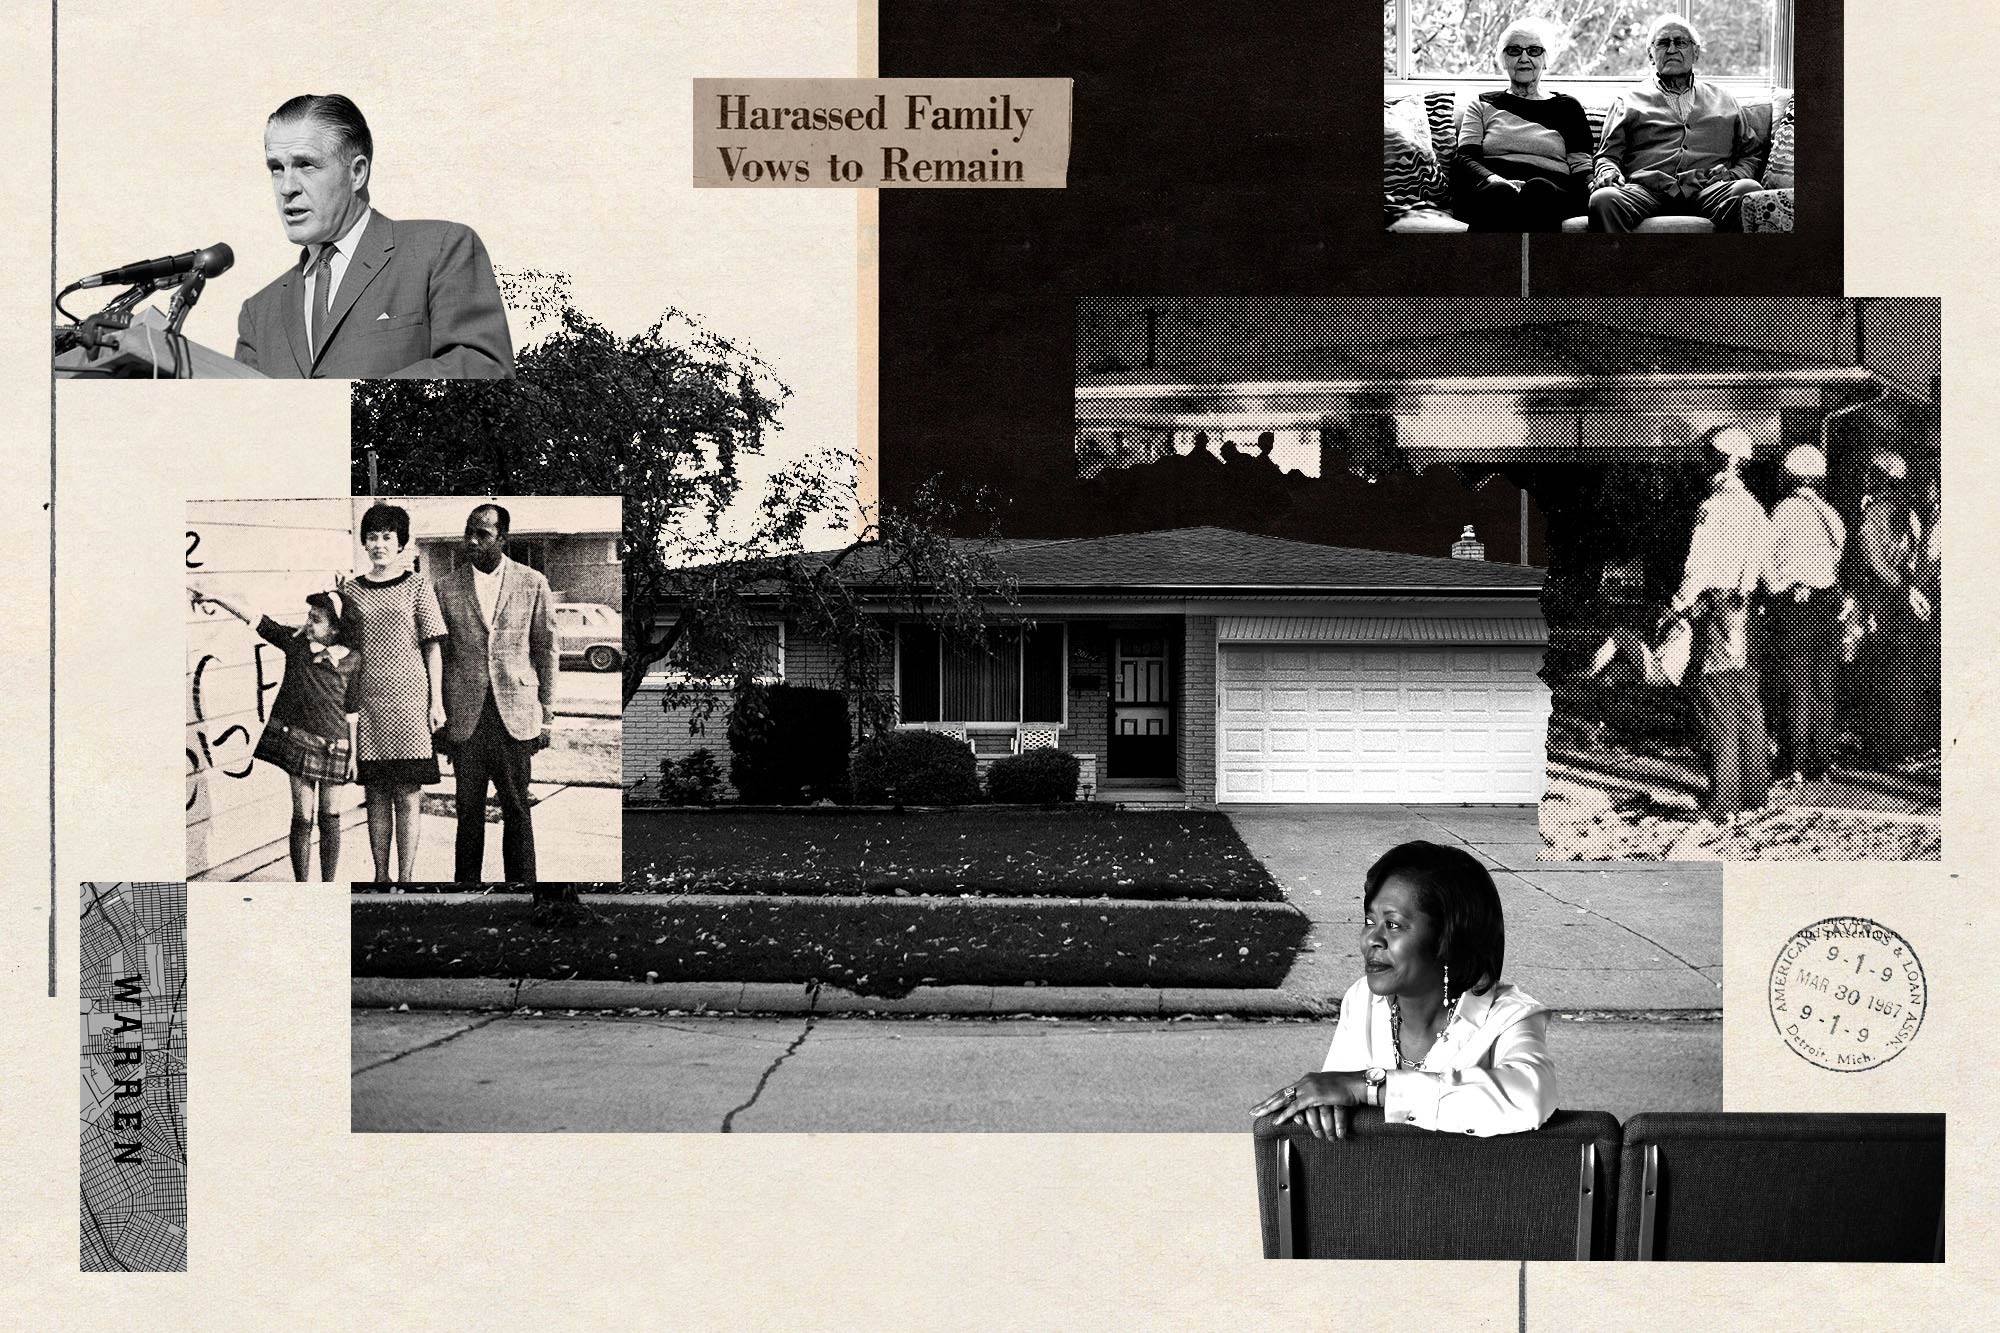 In 1967, a Black Man and a White Woman Bought a Home. American Politics Would Never Be the Same.